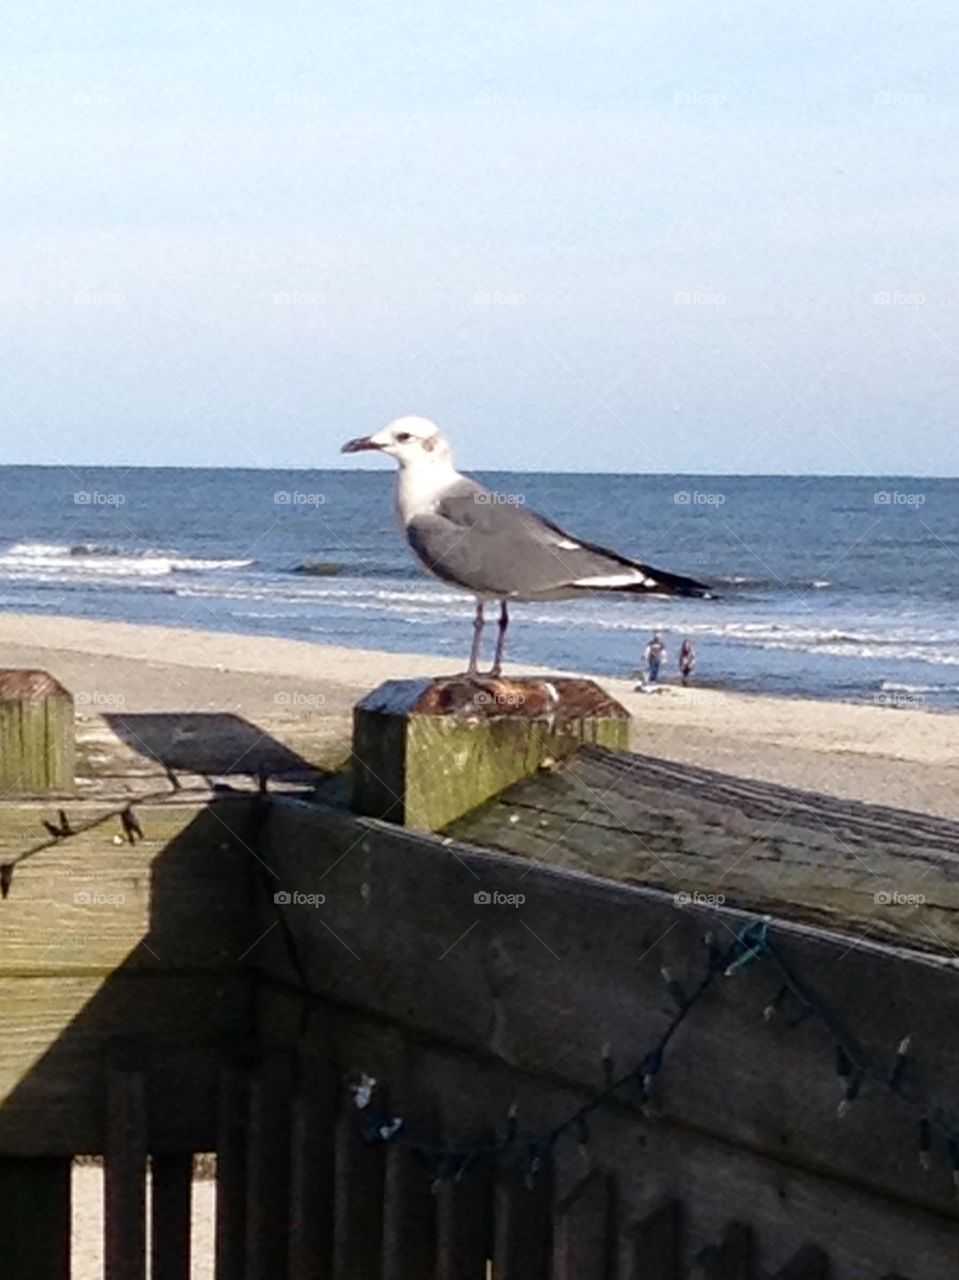 Seagull taking in the sites